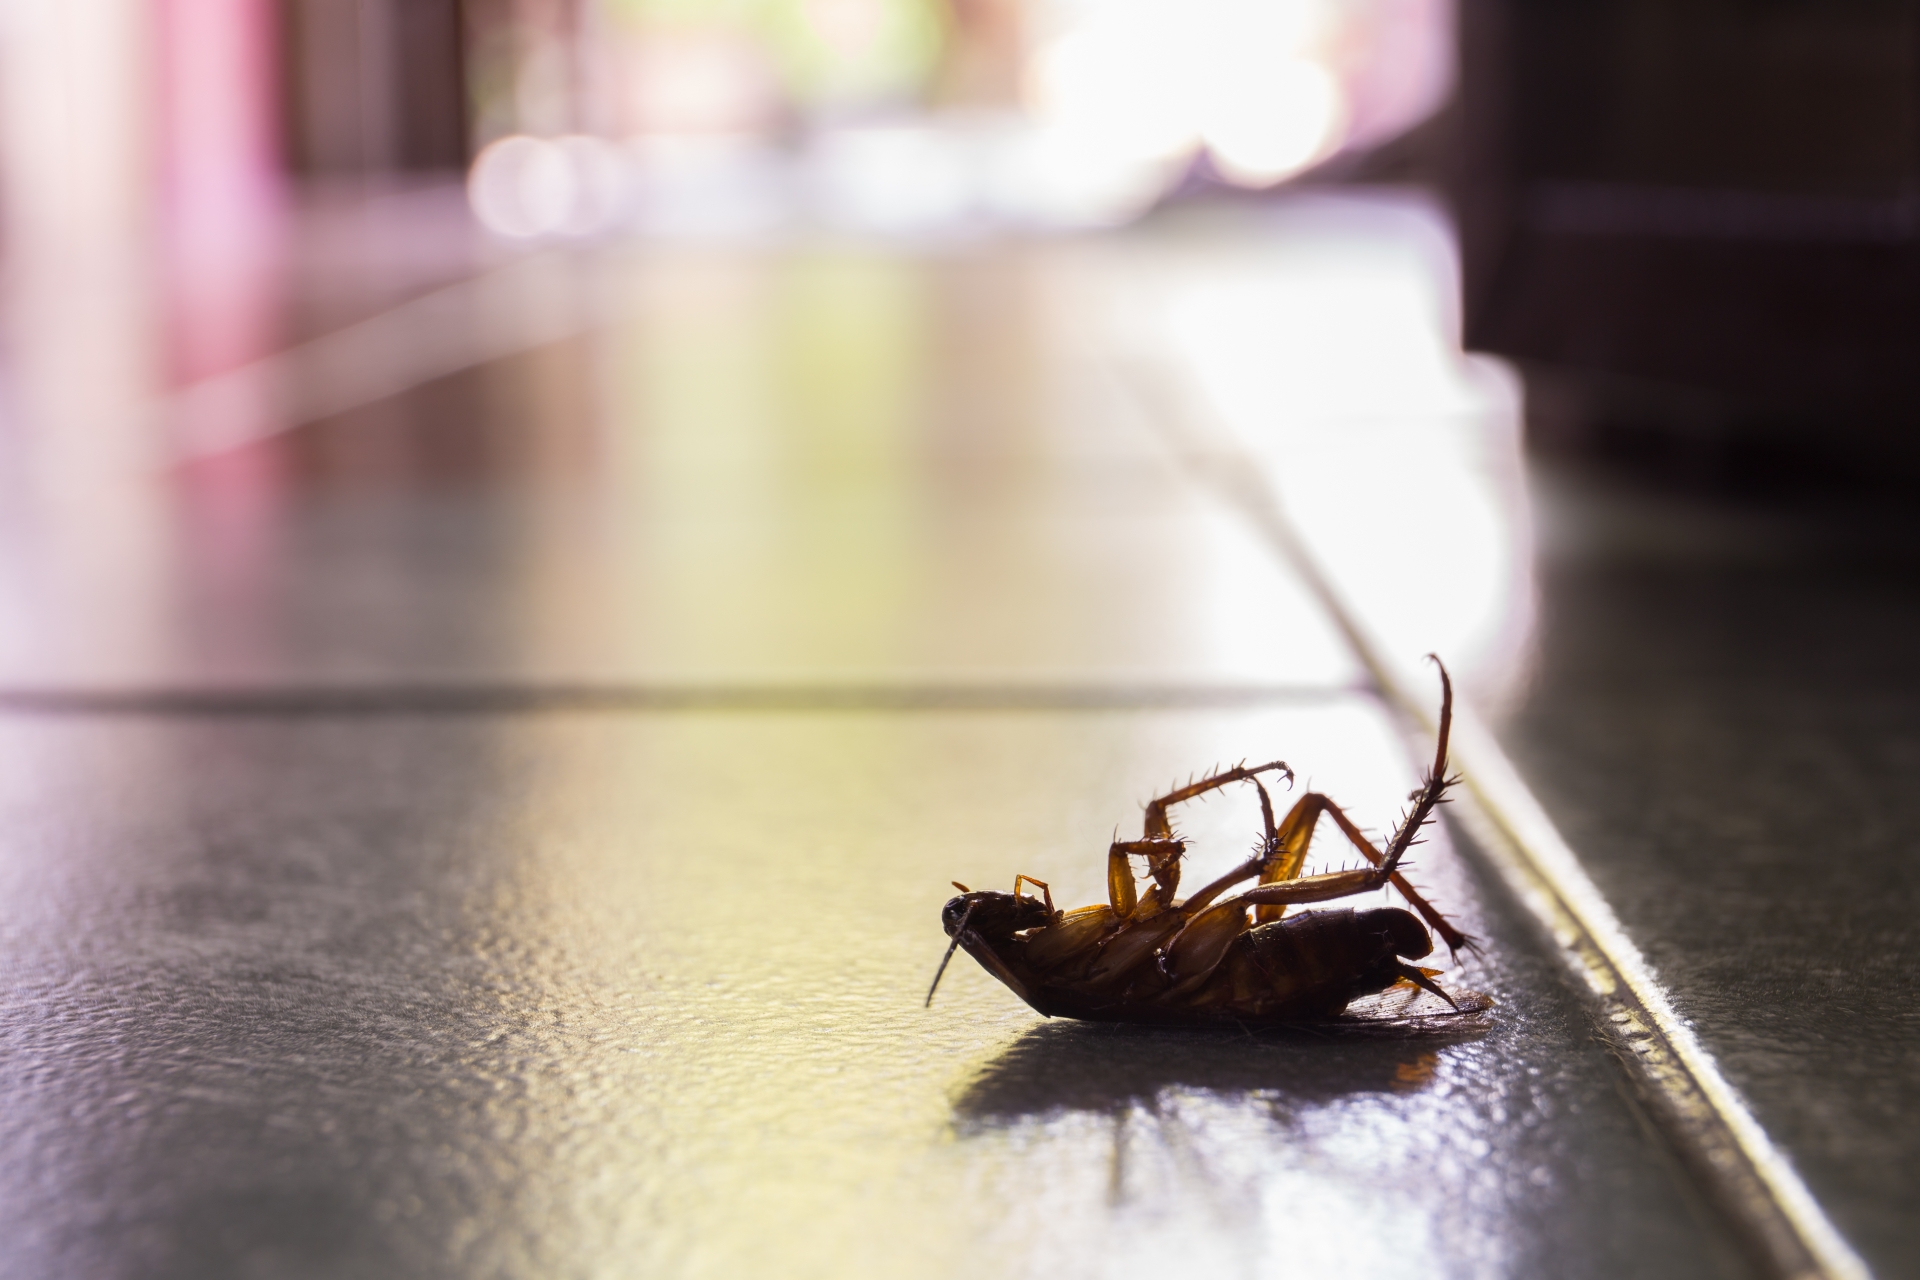 Cockroach Control, Pest Control in South Woodford, E18. Call Now 020 8166 9746